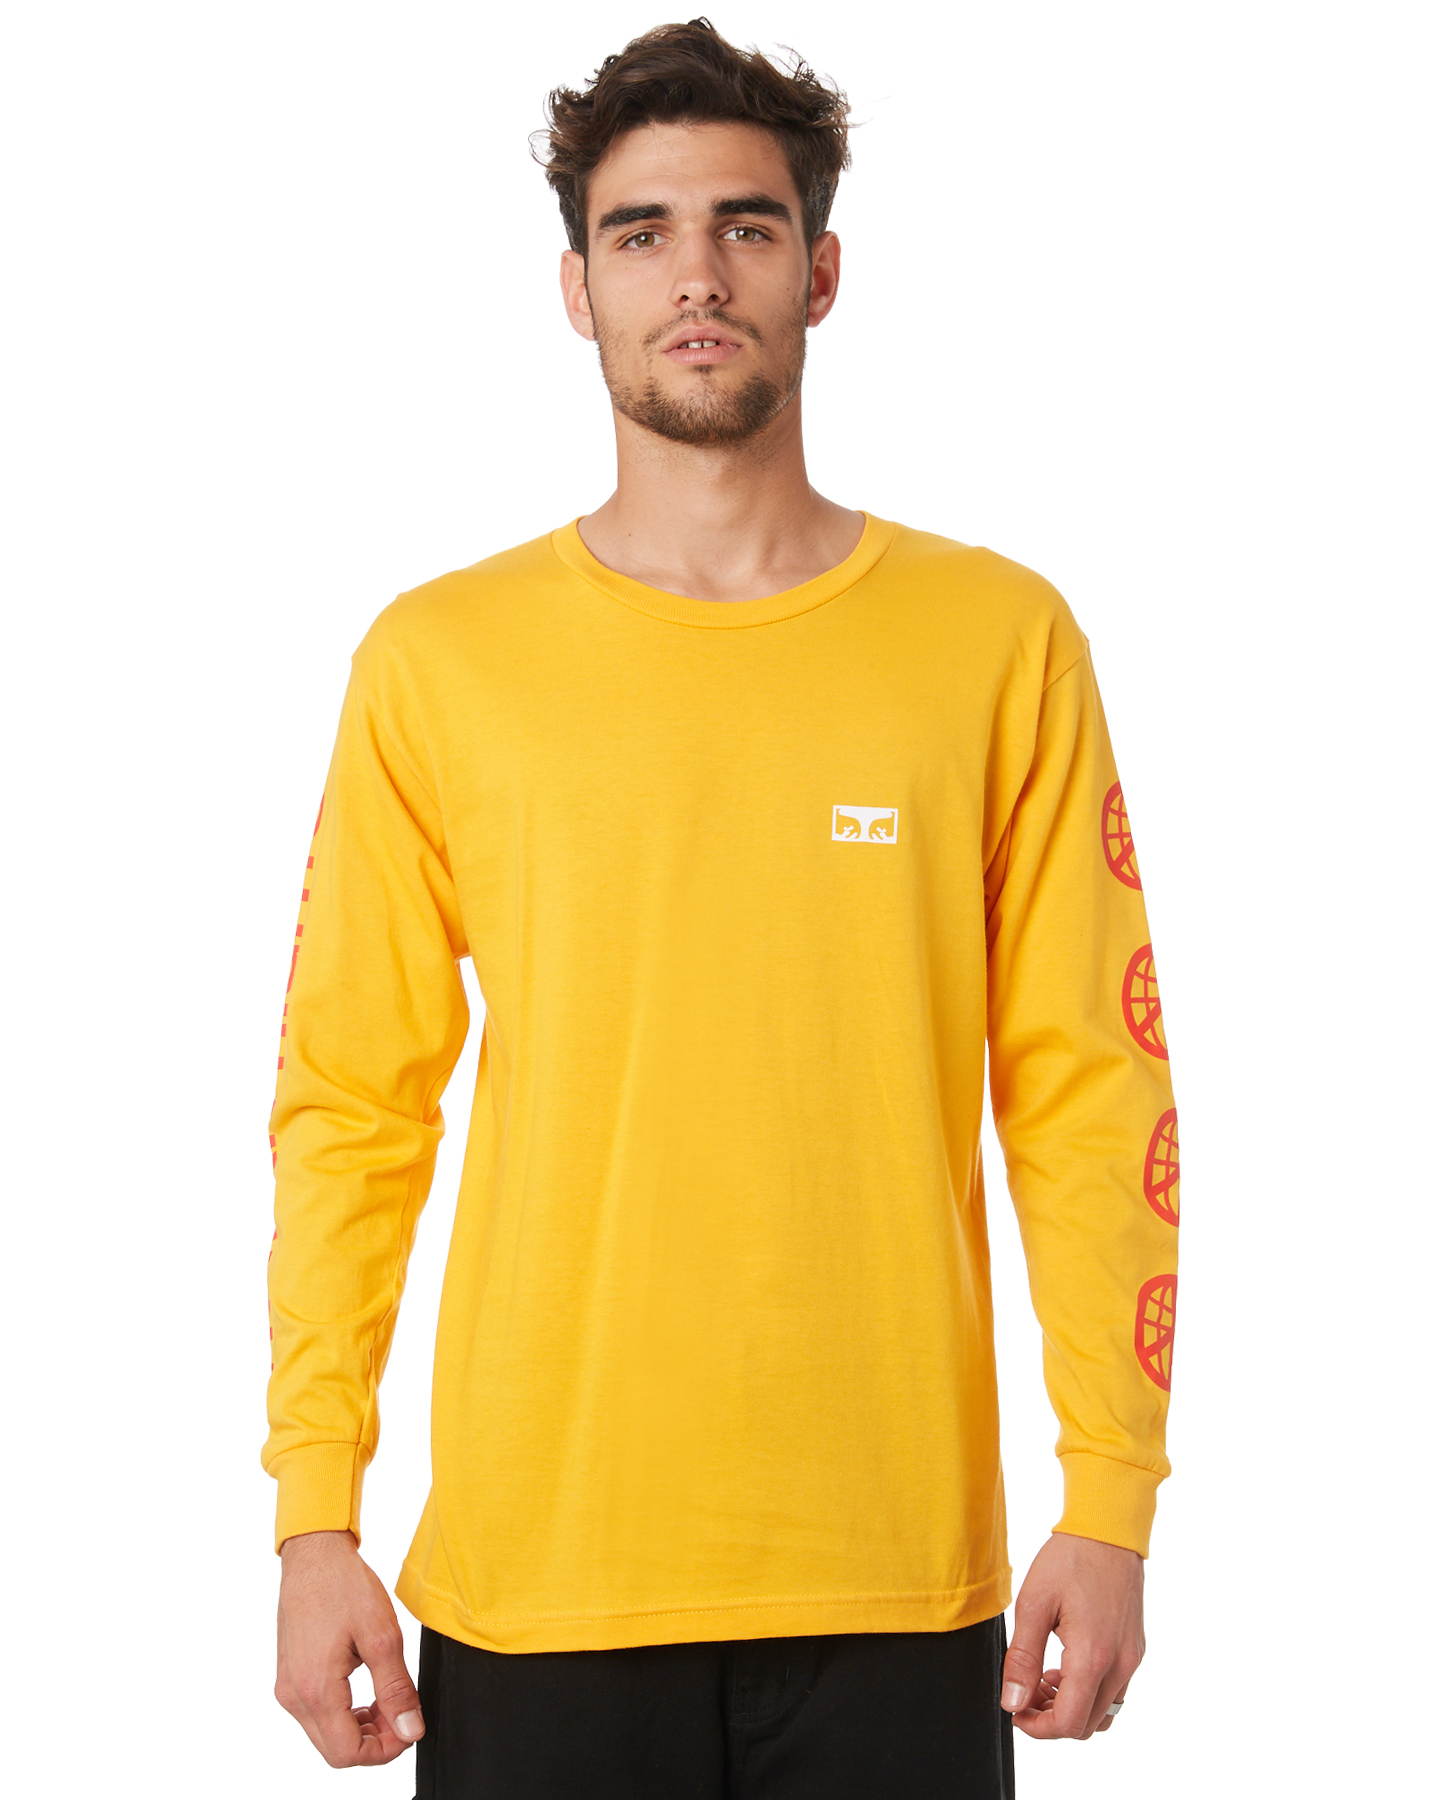 Obey Obey One Love Ls Mens Tee - Gold | SurfStitch